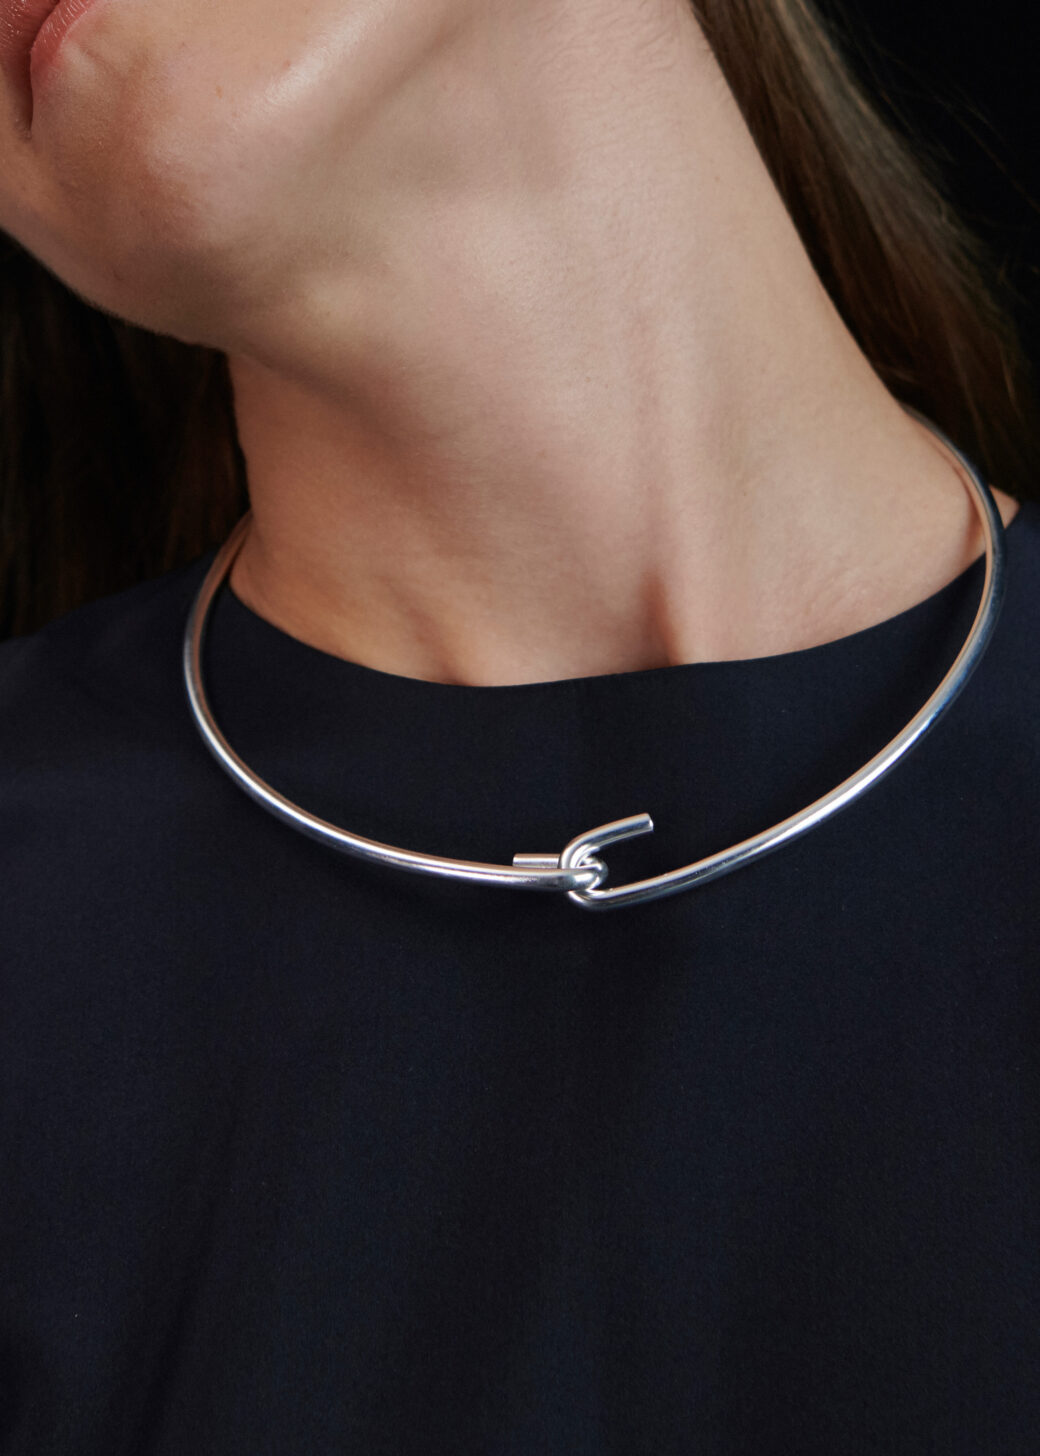 jewellery | silver | necklace | neck | detail